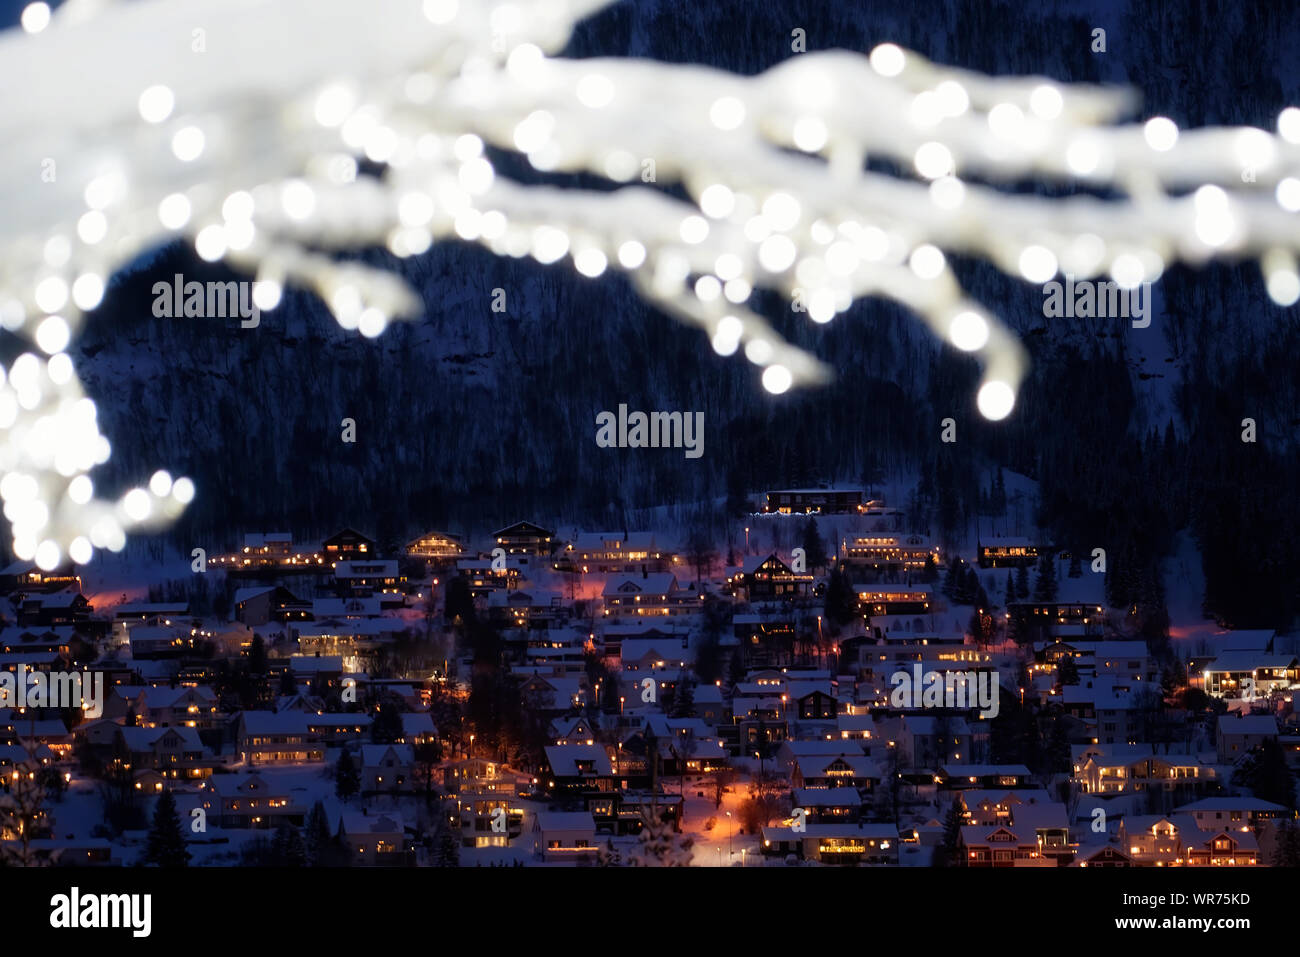 Defocused winter tree with lights and decorations in Tromso town, Northern Norway Stock Photo